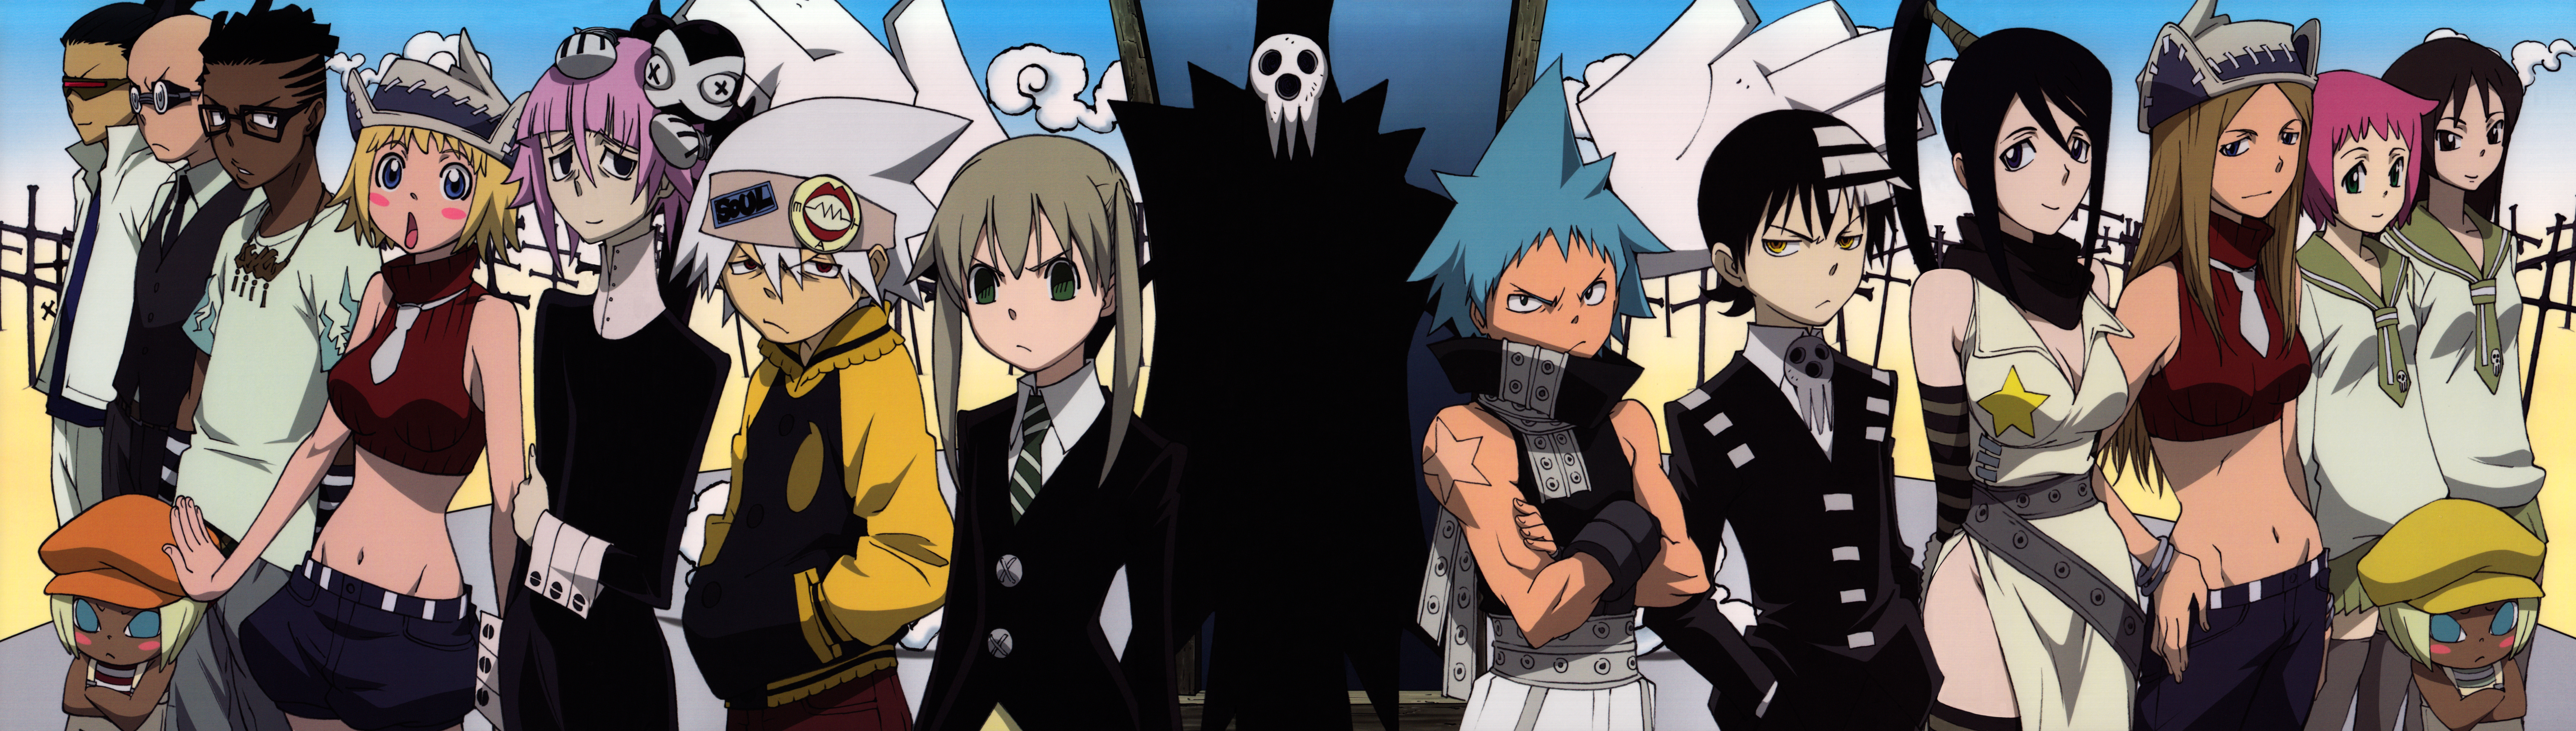 Adult Swim got it right: Soul Eater is on the air! | Chibi-chan's Anime